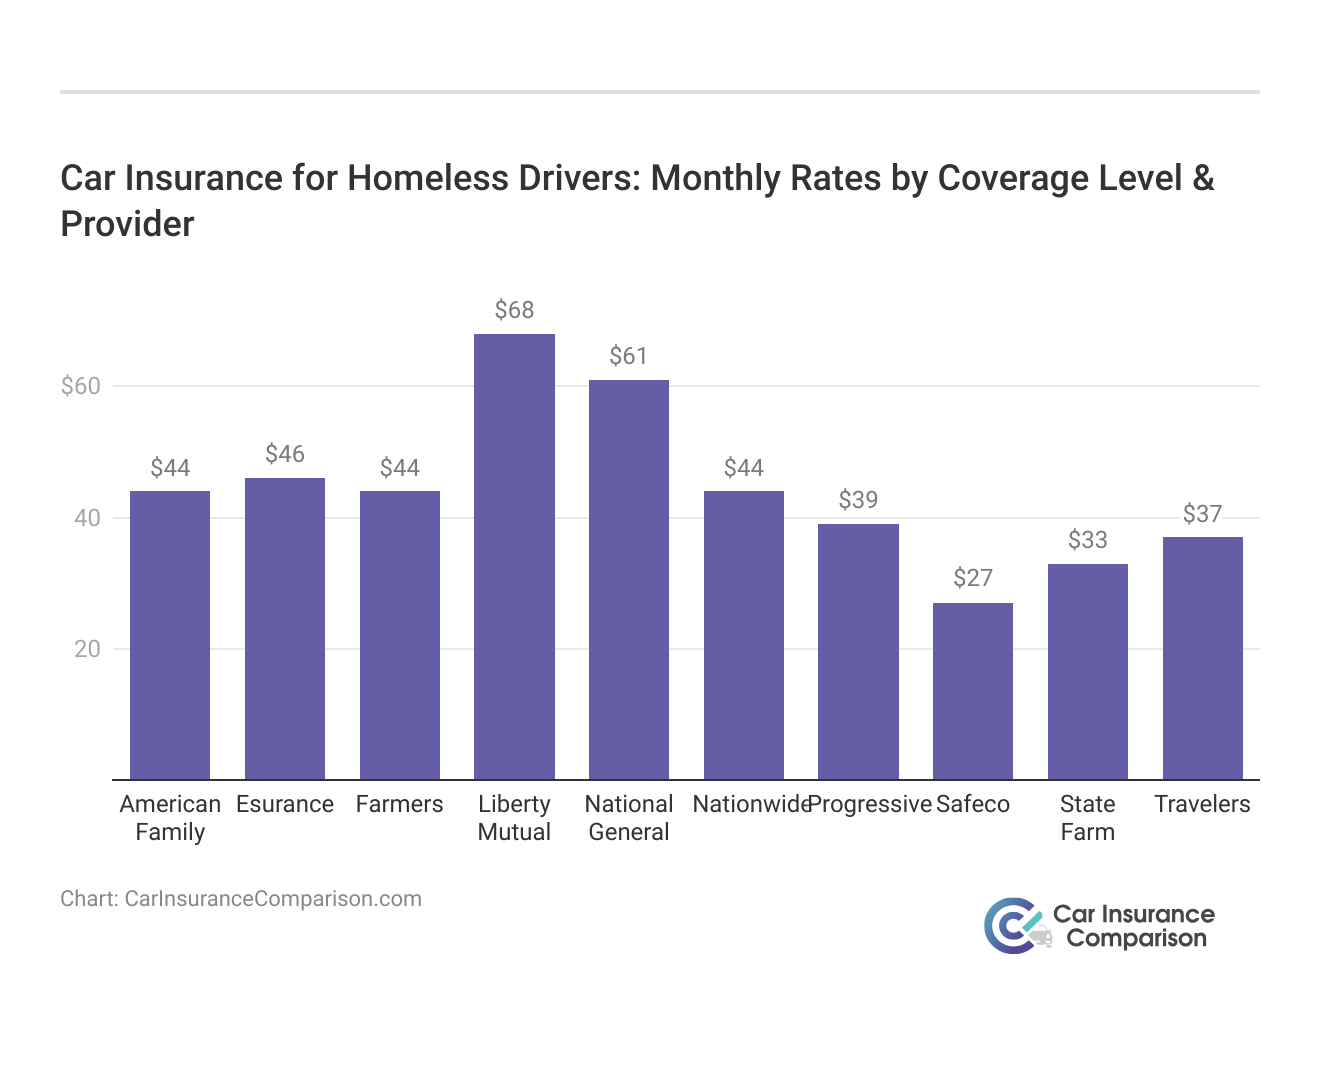 <h3>Car Insurance for Homeless Drivers: Monthly Rates by Coverage Level & Provider </h3>